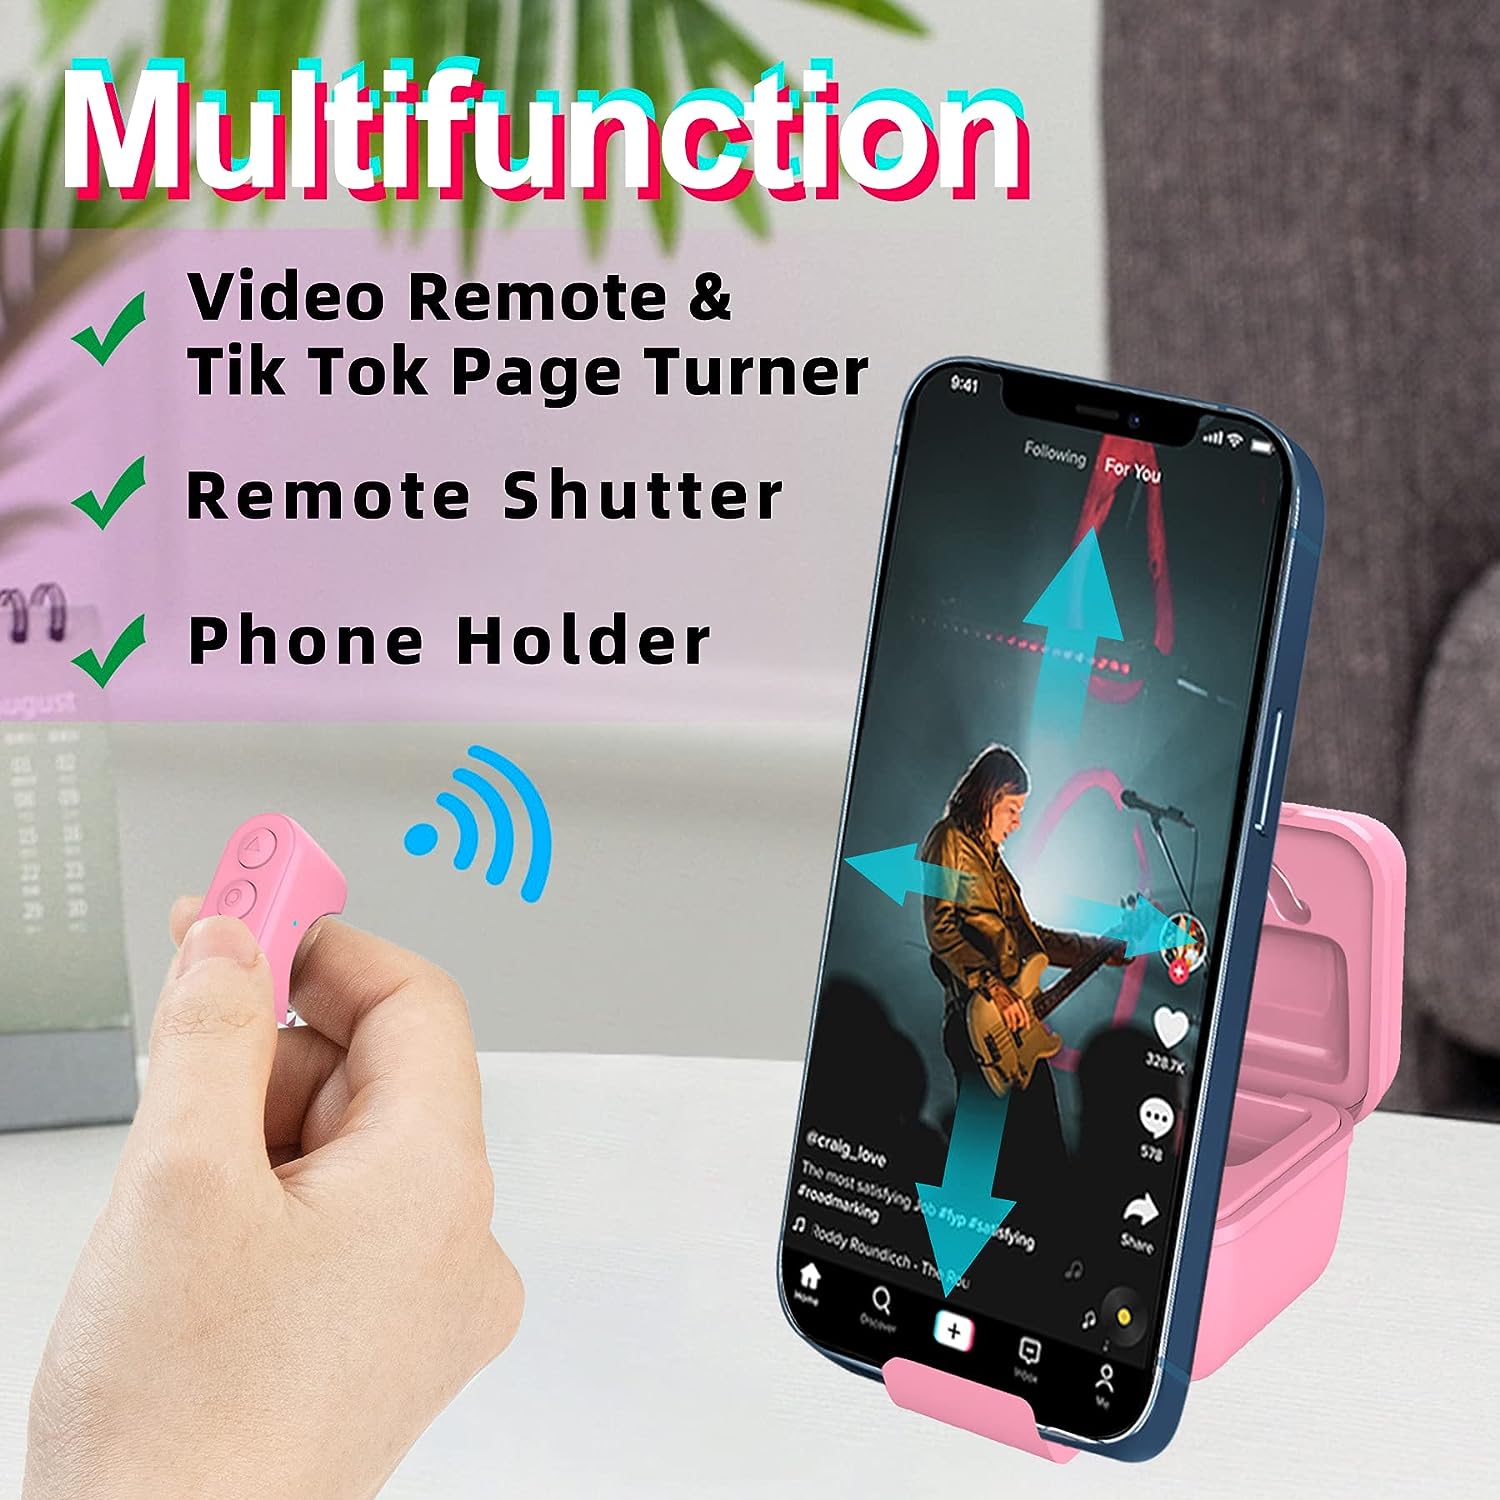  TIK TOK Wireless Page Turner Tiktok Scrolling Button Ring  Fingertip Bluetooth Remote Control with Charging Case for iPhone Android  ipad Cell Phone (Black) : Electronics